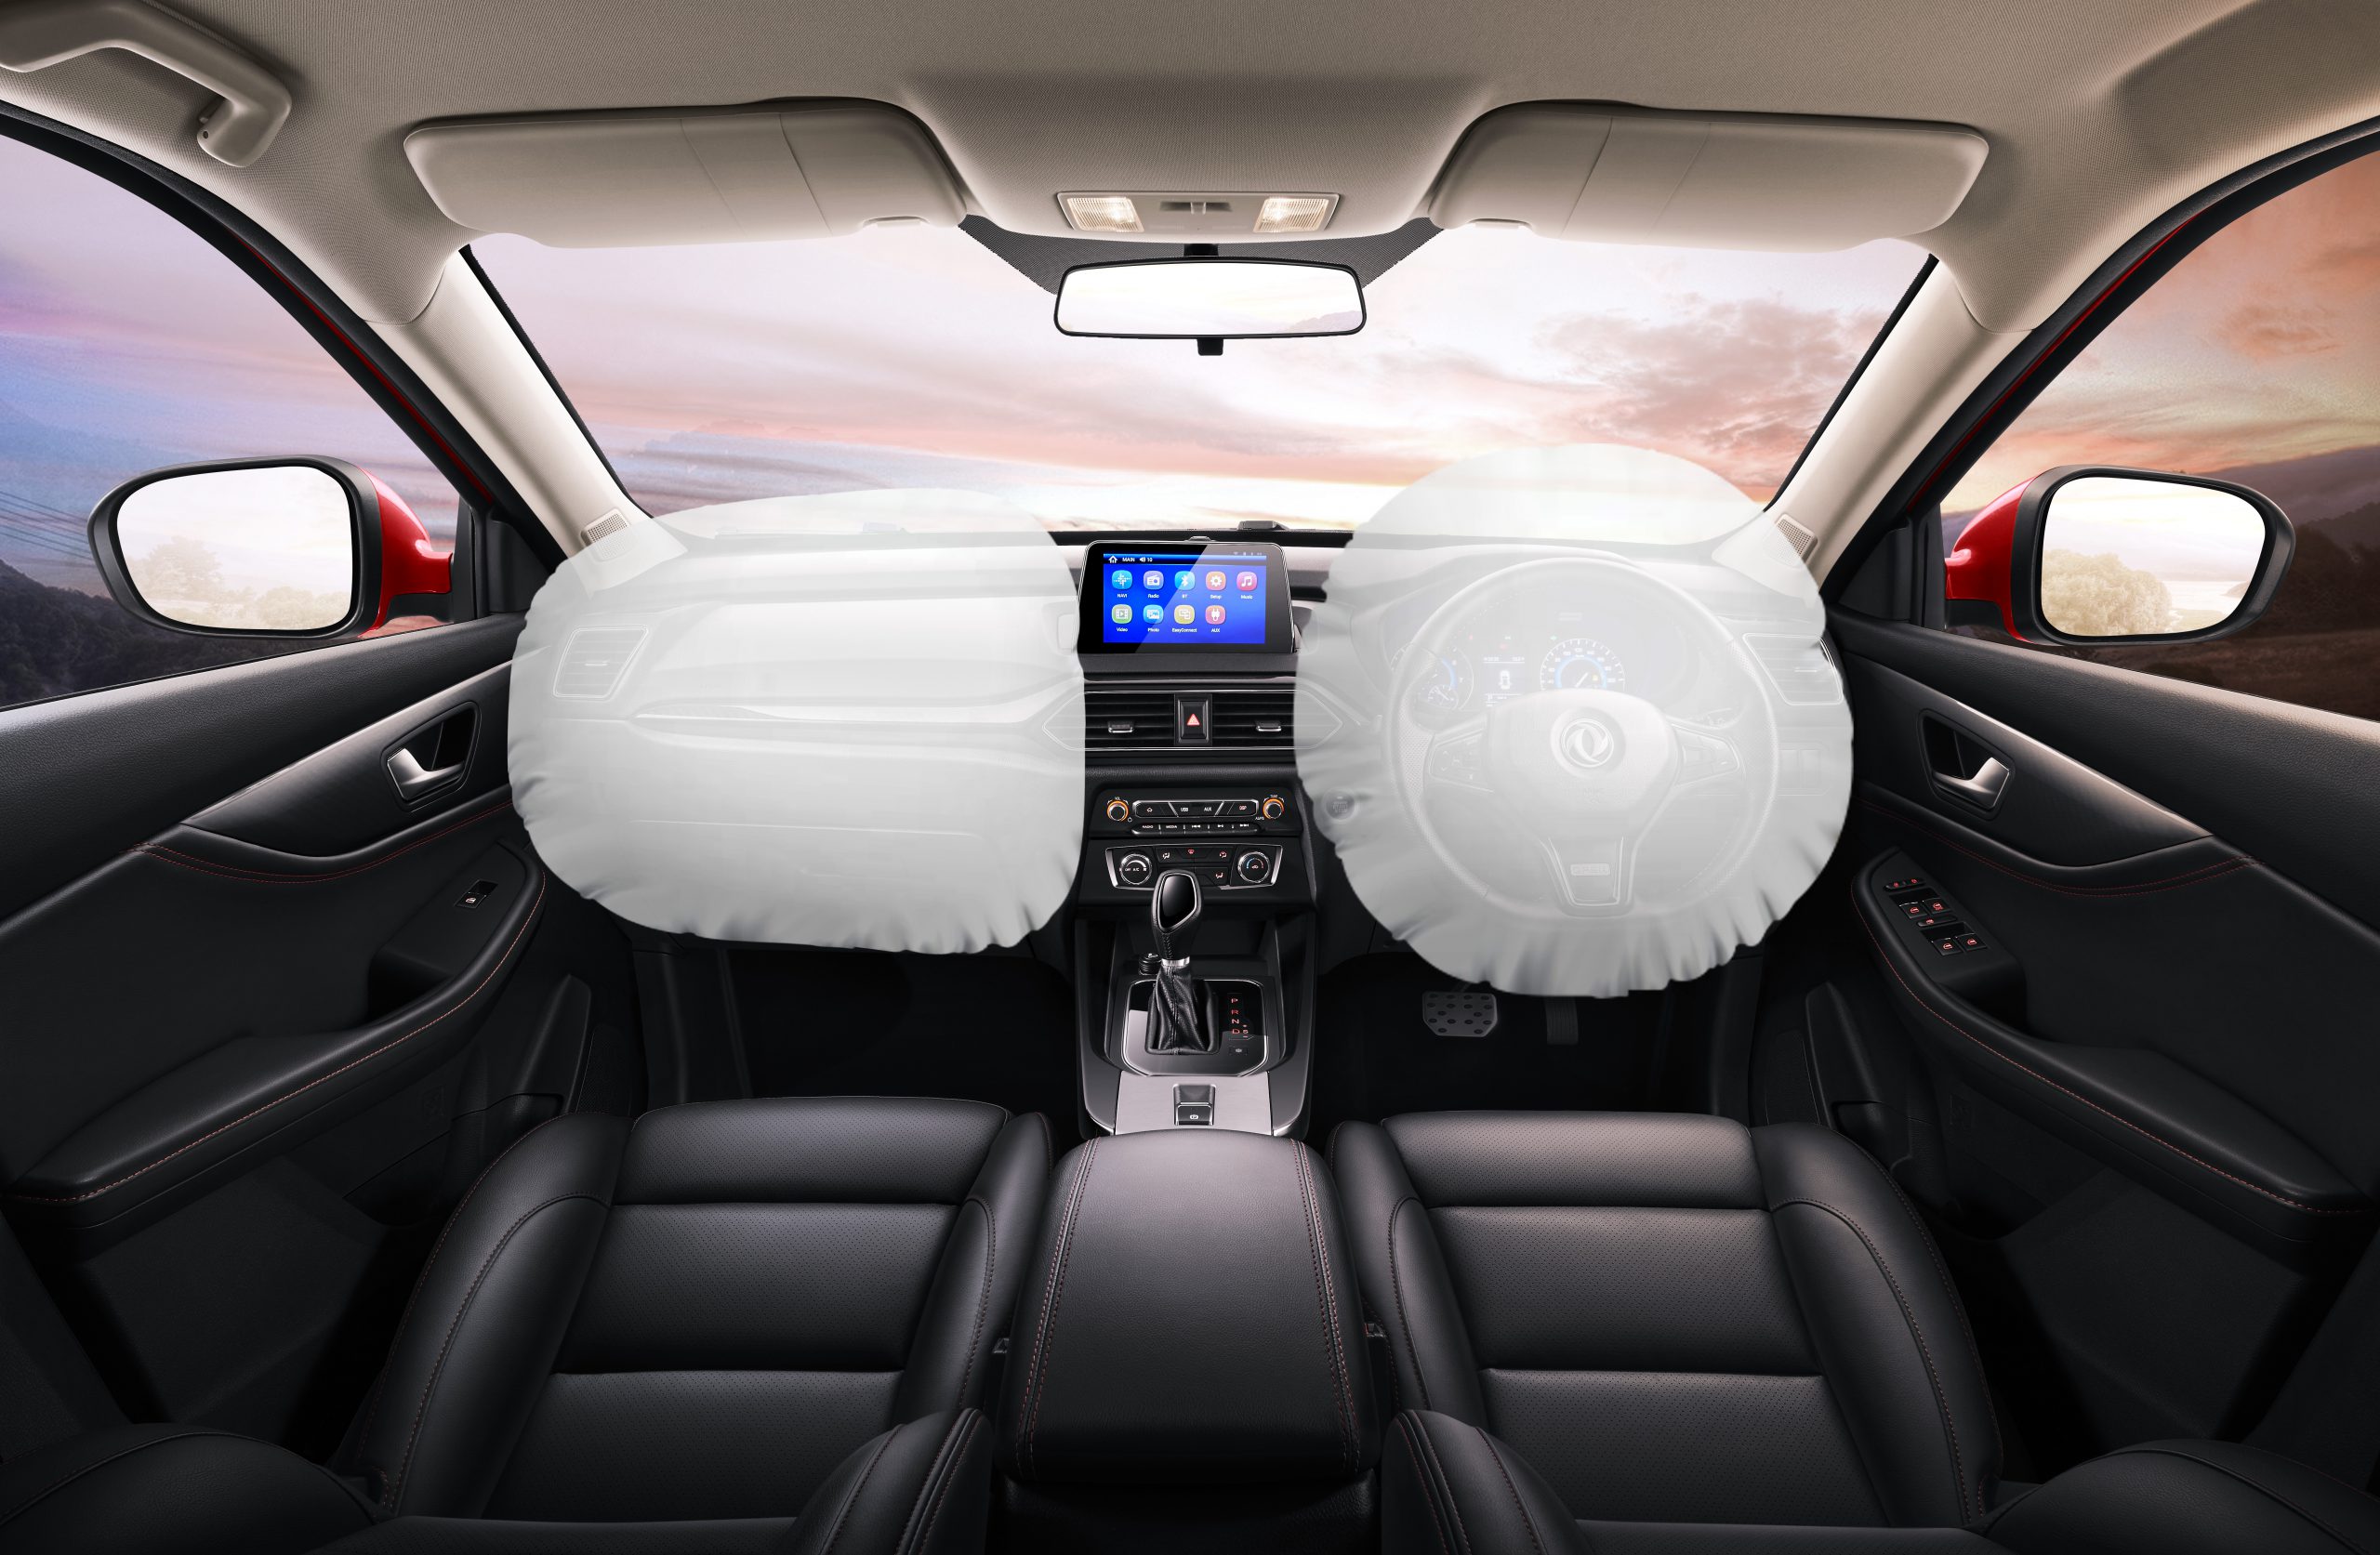 DFSK Glory 560 Dual Airbags